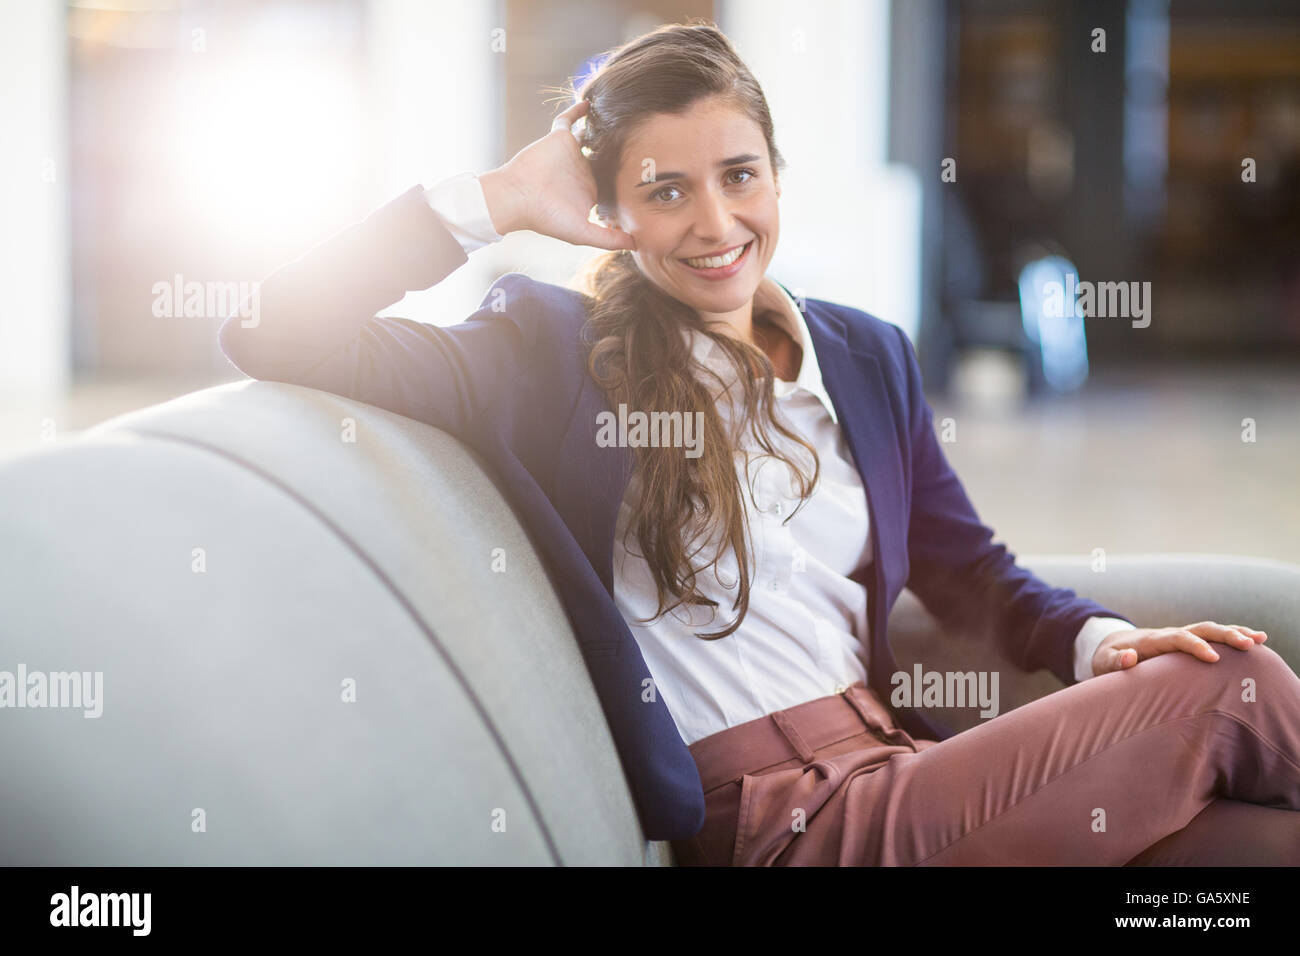 Portrait of smiling woman sitting in office Stock Photo